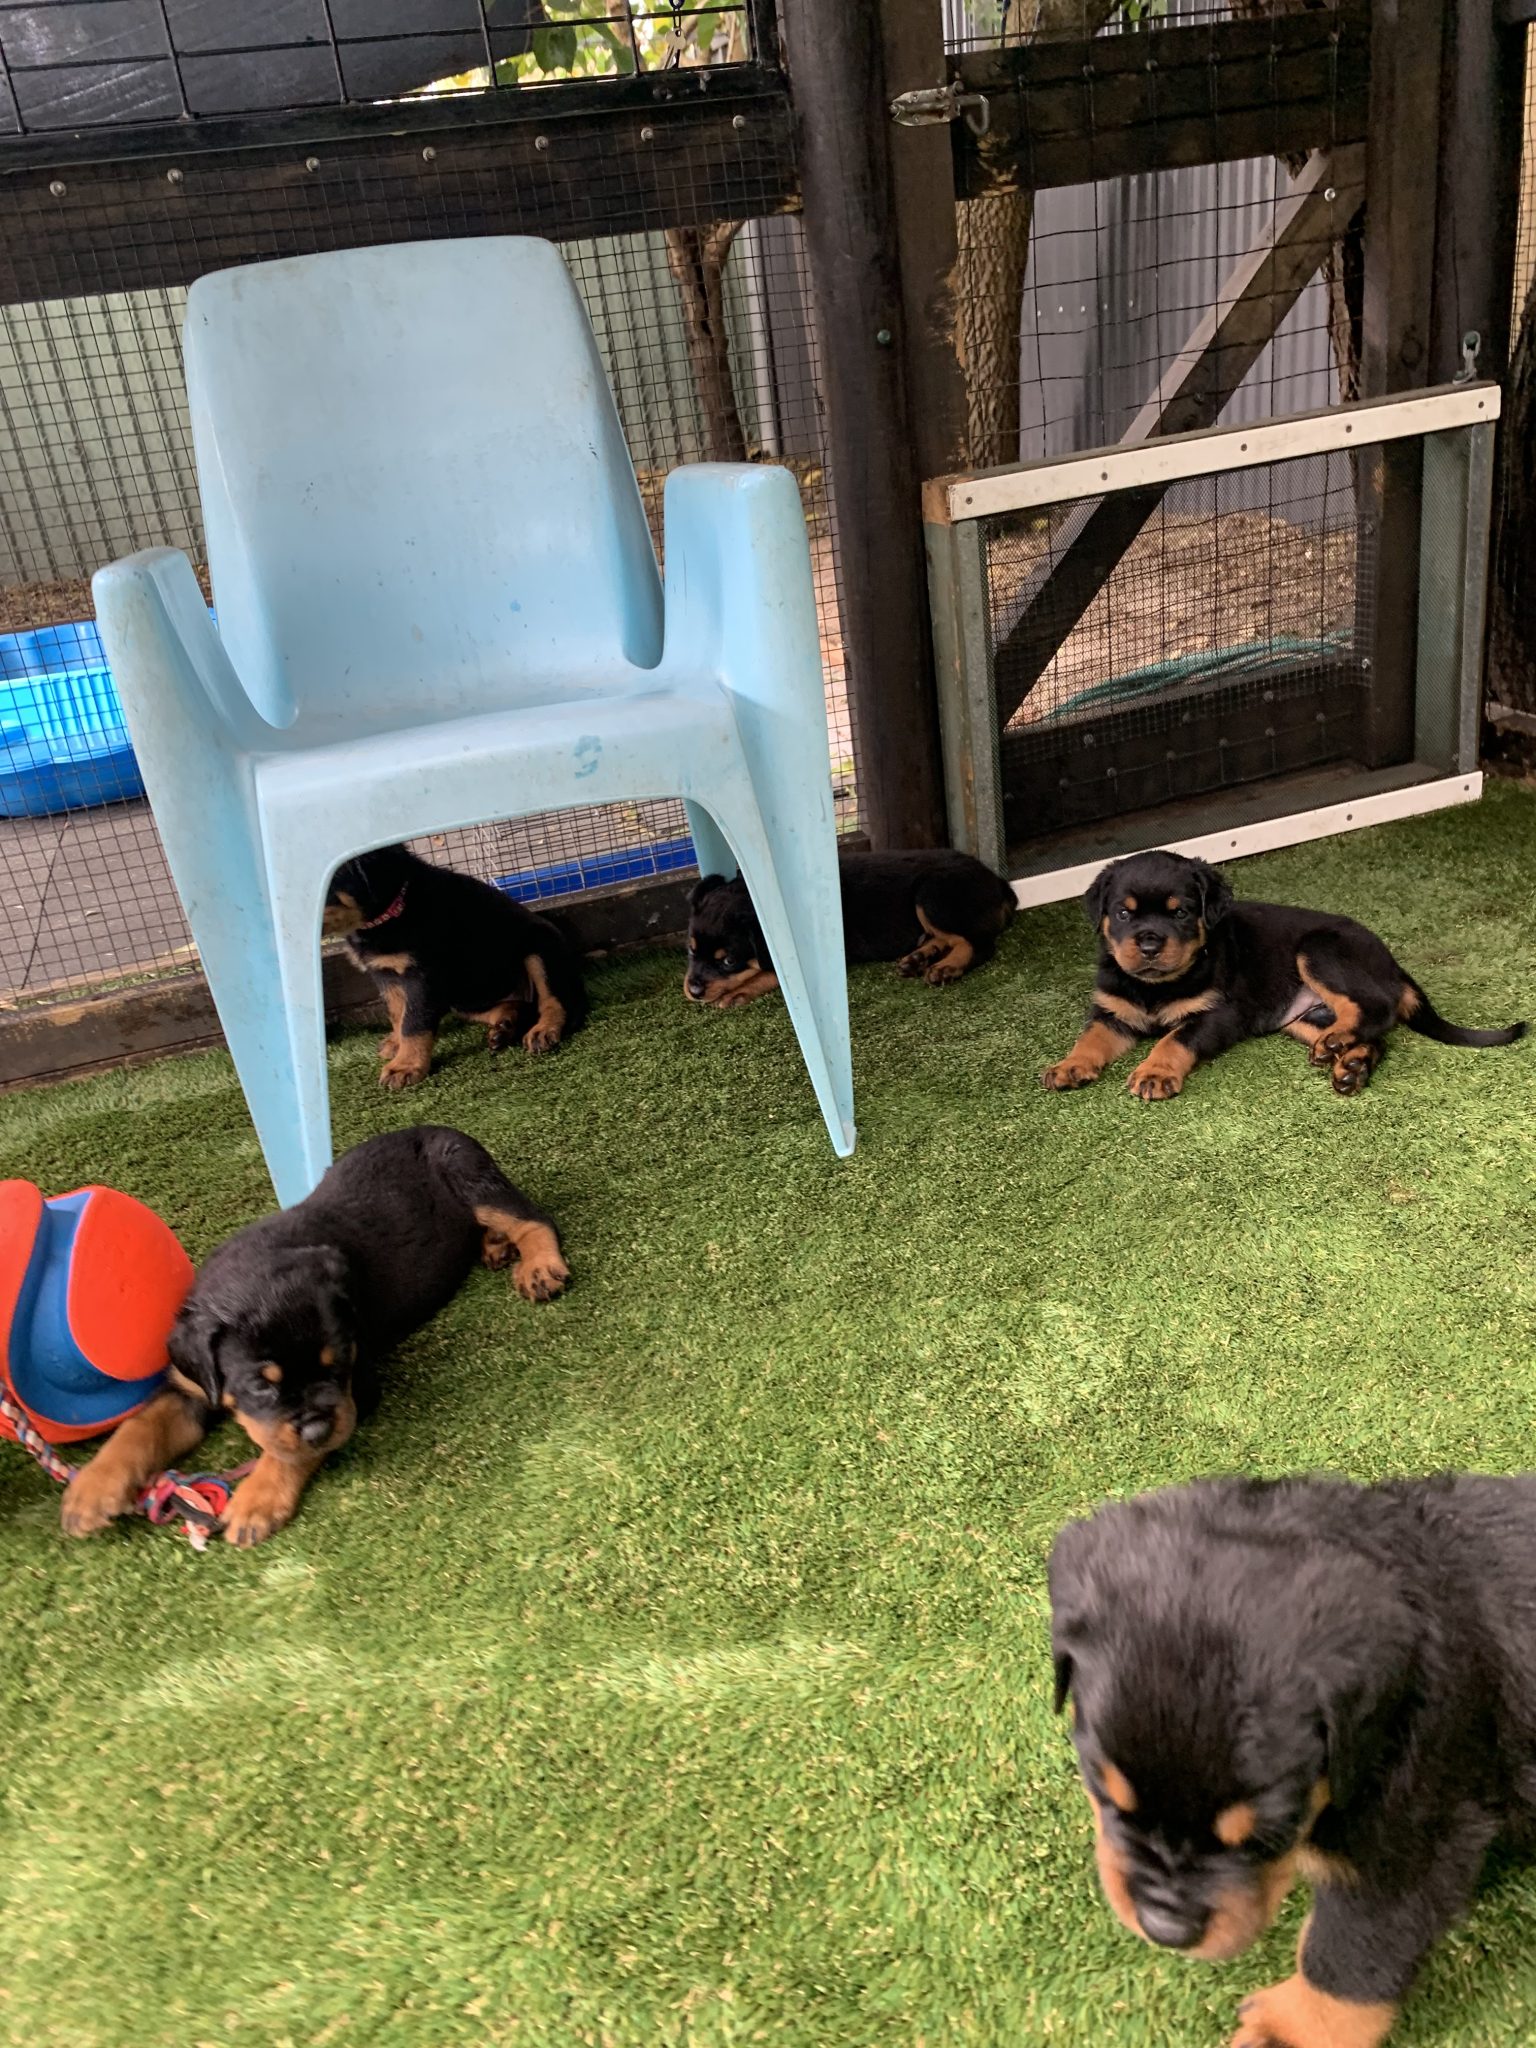 Pedigree Rottweiler Puppies/ Tailed and Bobtails